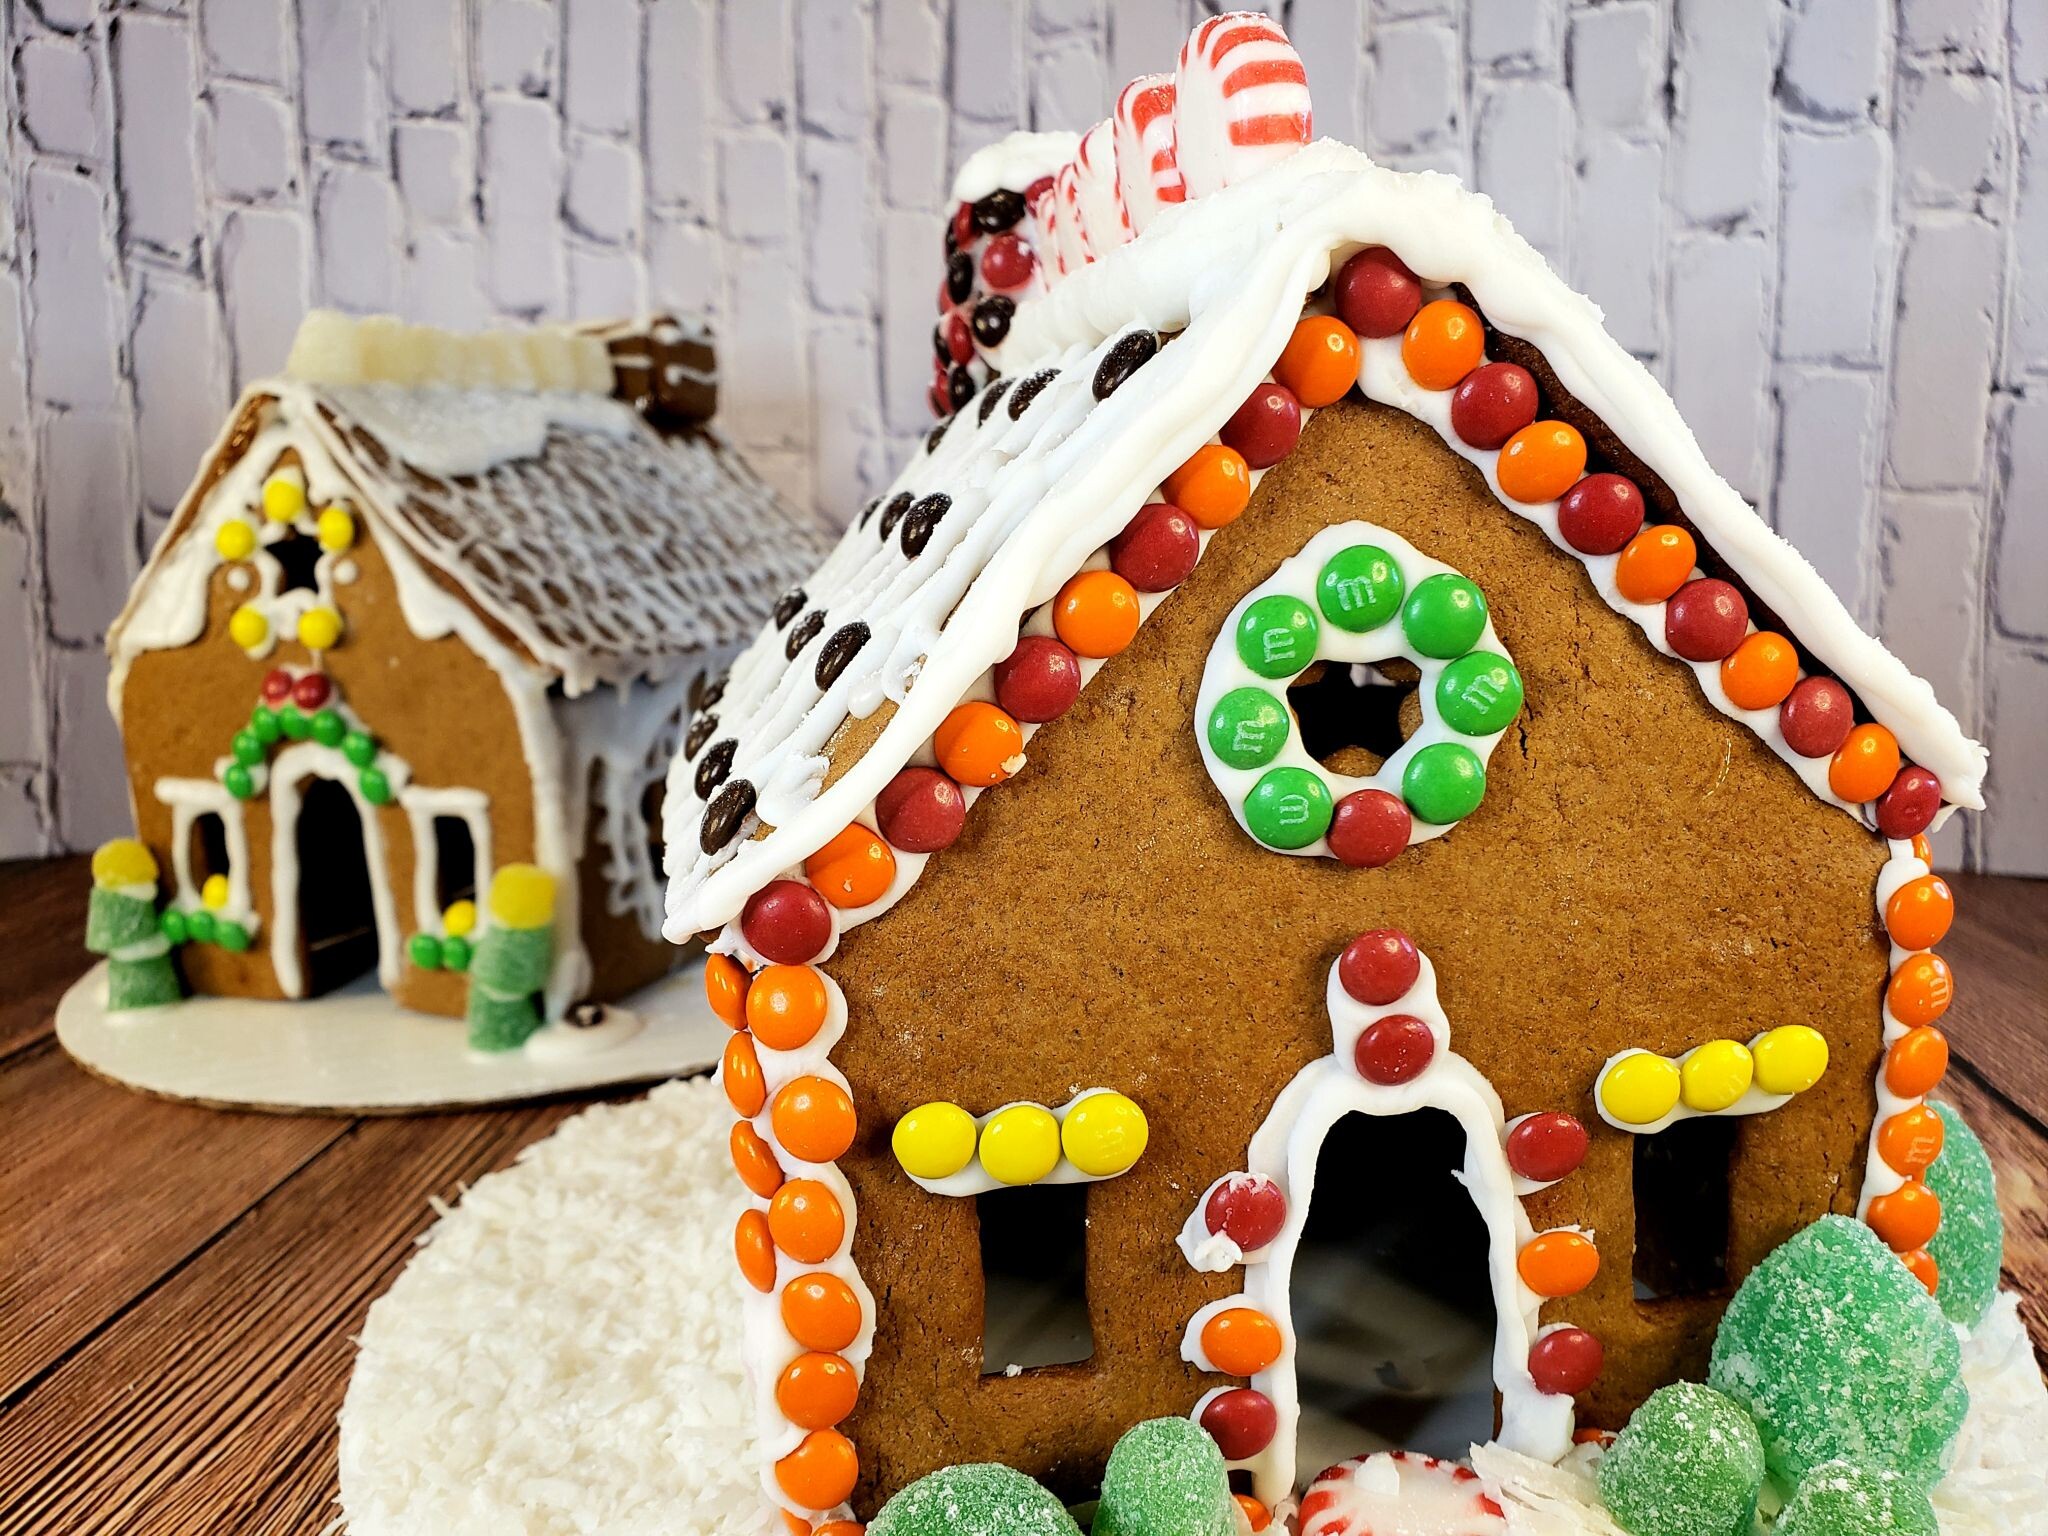 Gingerbread House: Gingerbread creations, Gumdrops, M&Ms, Candy canes, Peppermint swirl candies, Sprinkles. 2050x1540 HD Background.